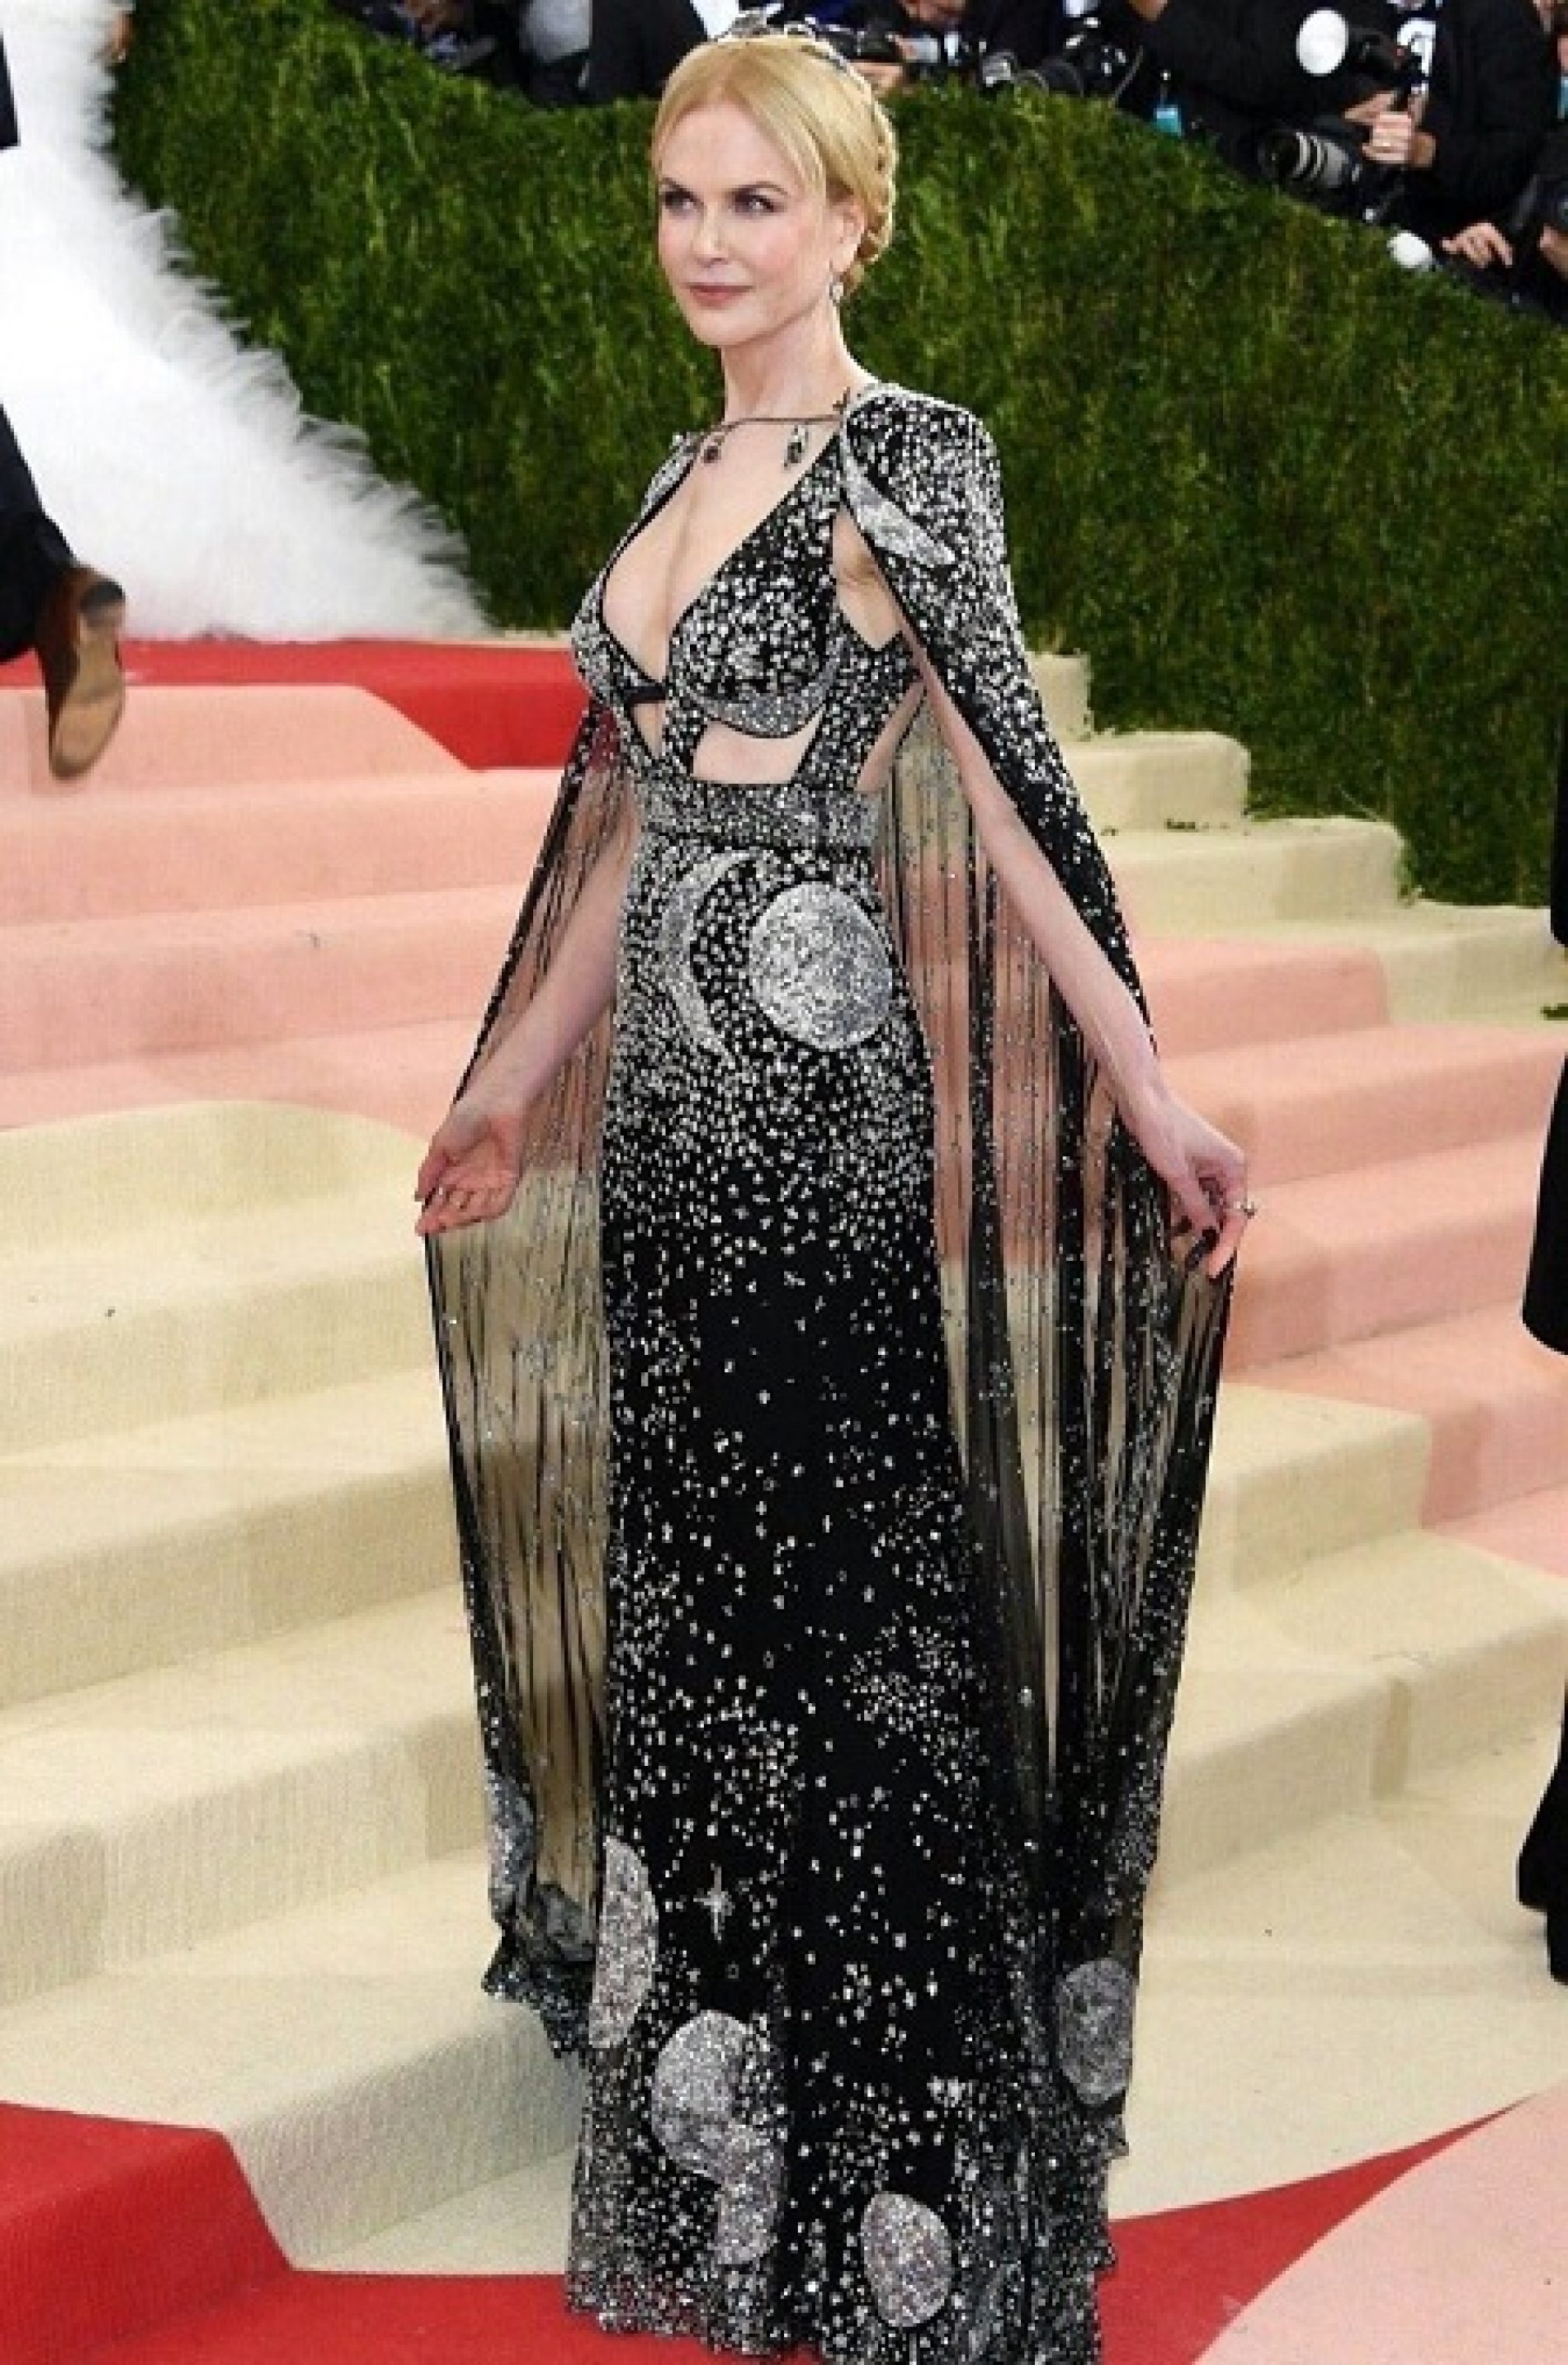 The #MetGala Story We Wish Hollywood Would Tell